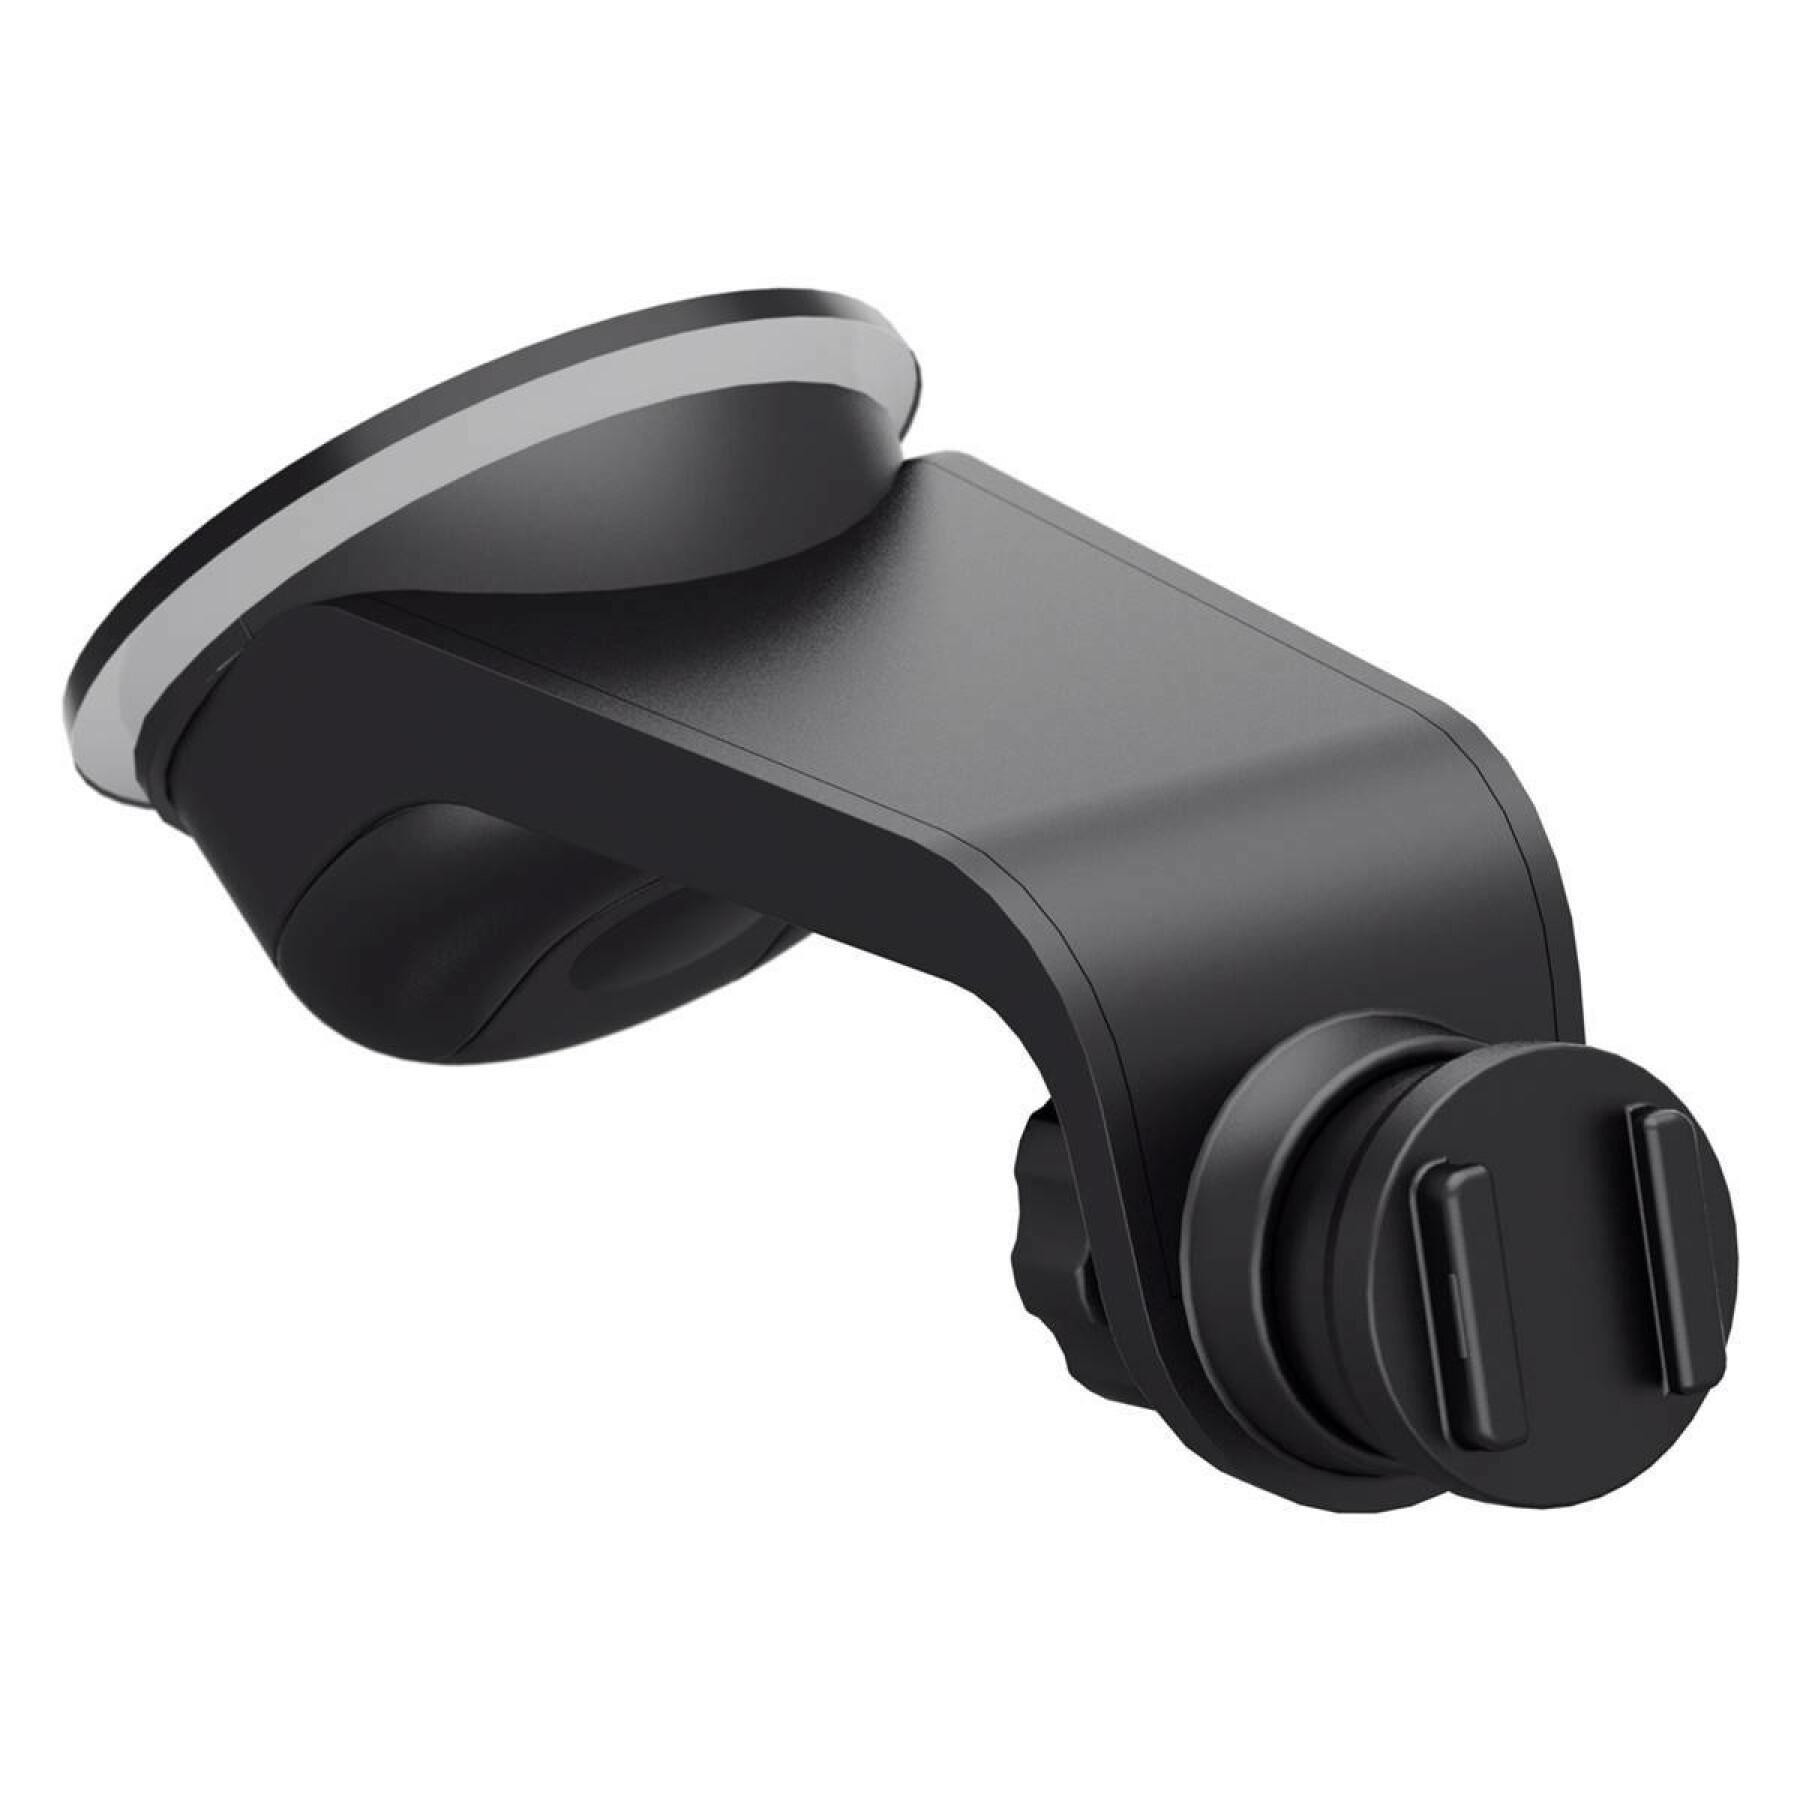 Phone holder SP Connect Suction Mount Car